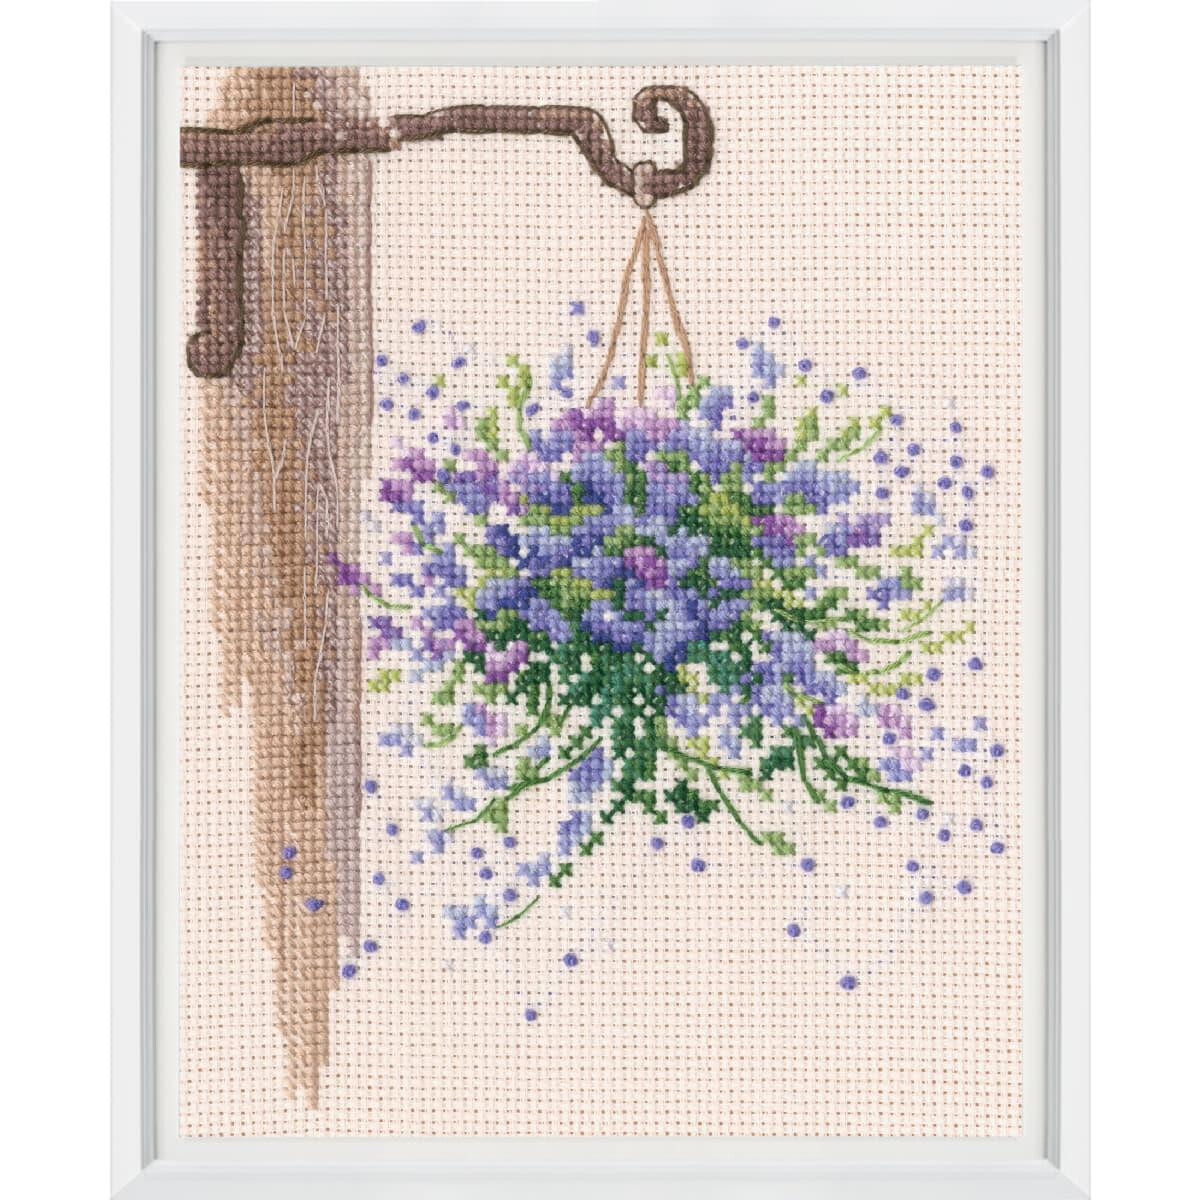 RTO counted cross stitch kit "In the Moment, hanging...